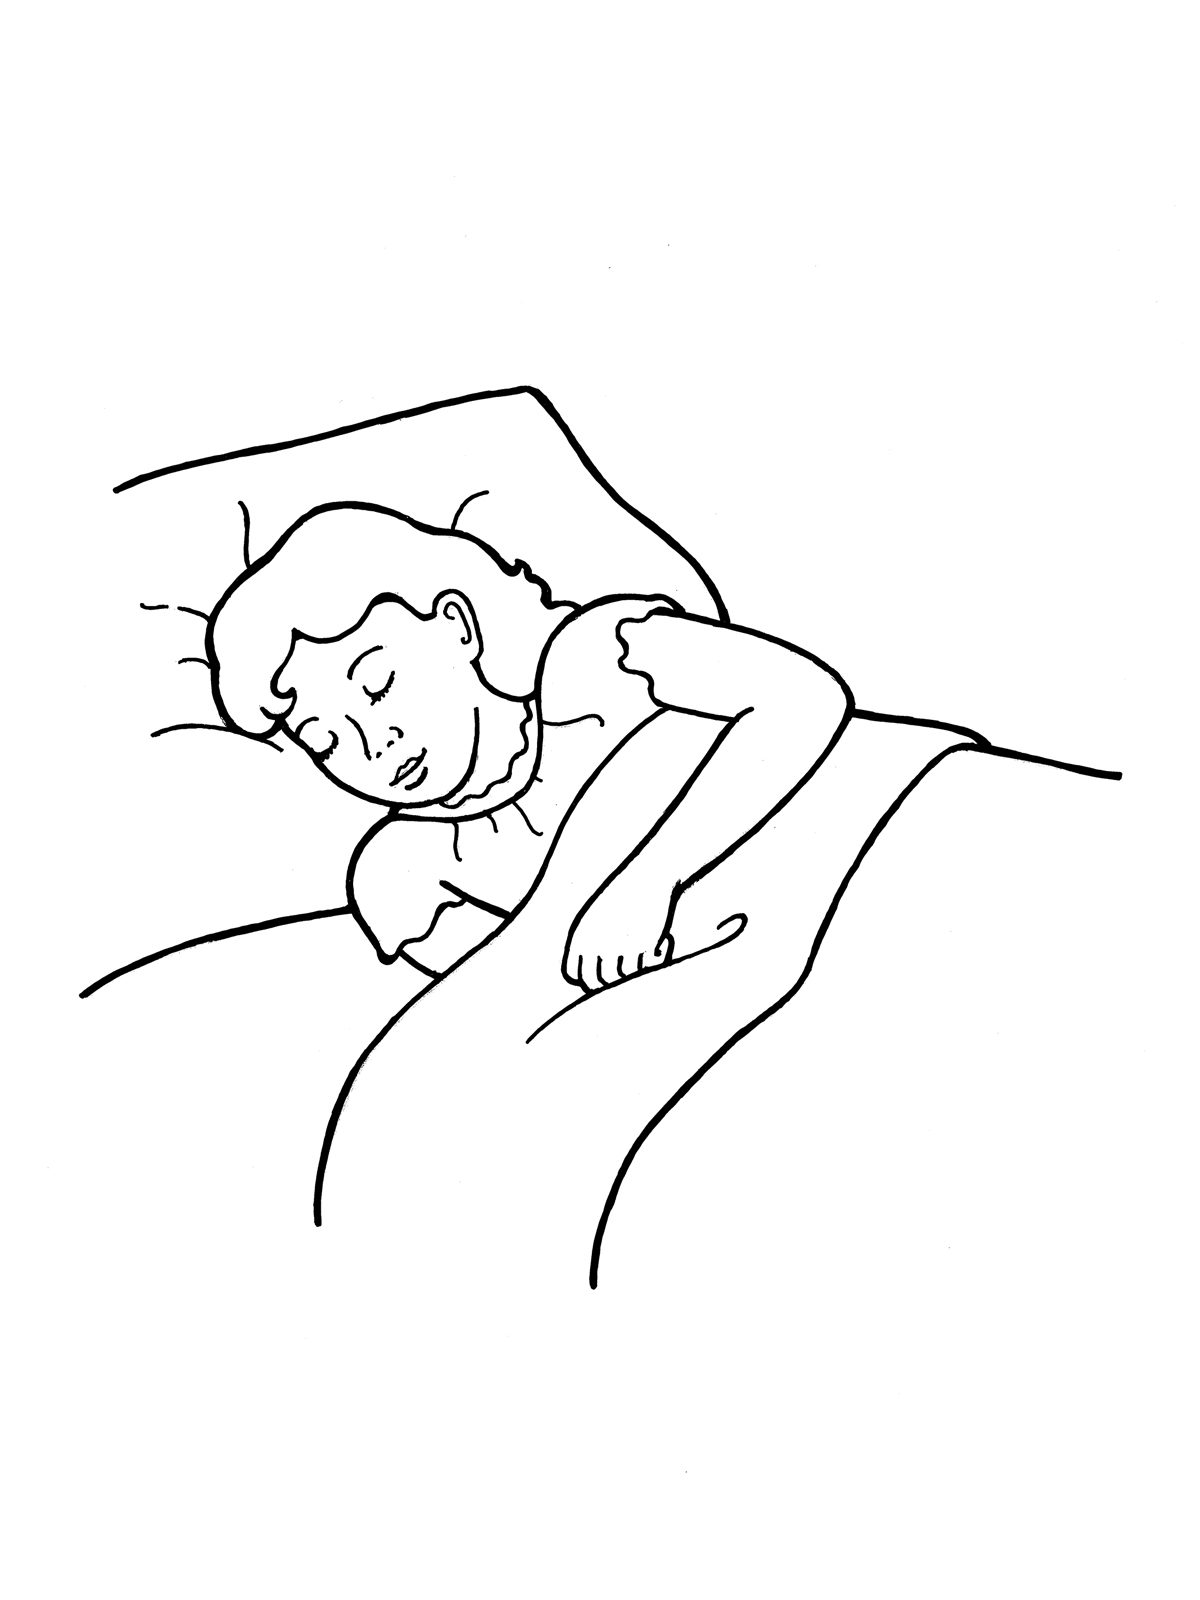 Free Sleeping Clipart Black And White Download Free Sleeping Clipart